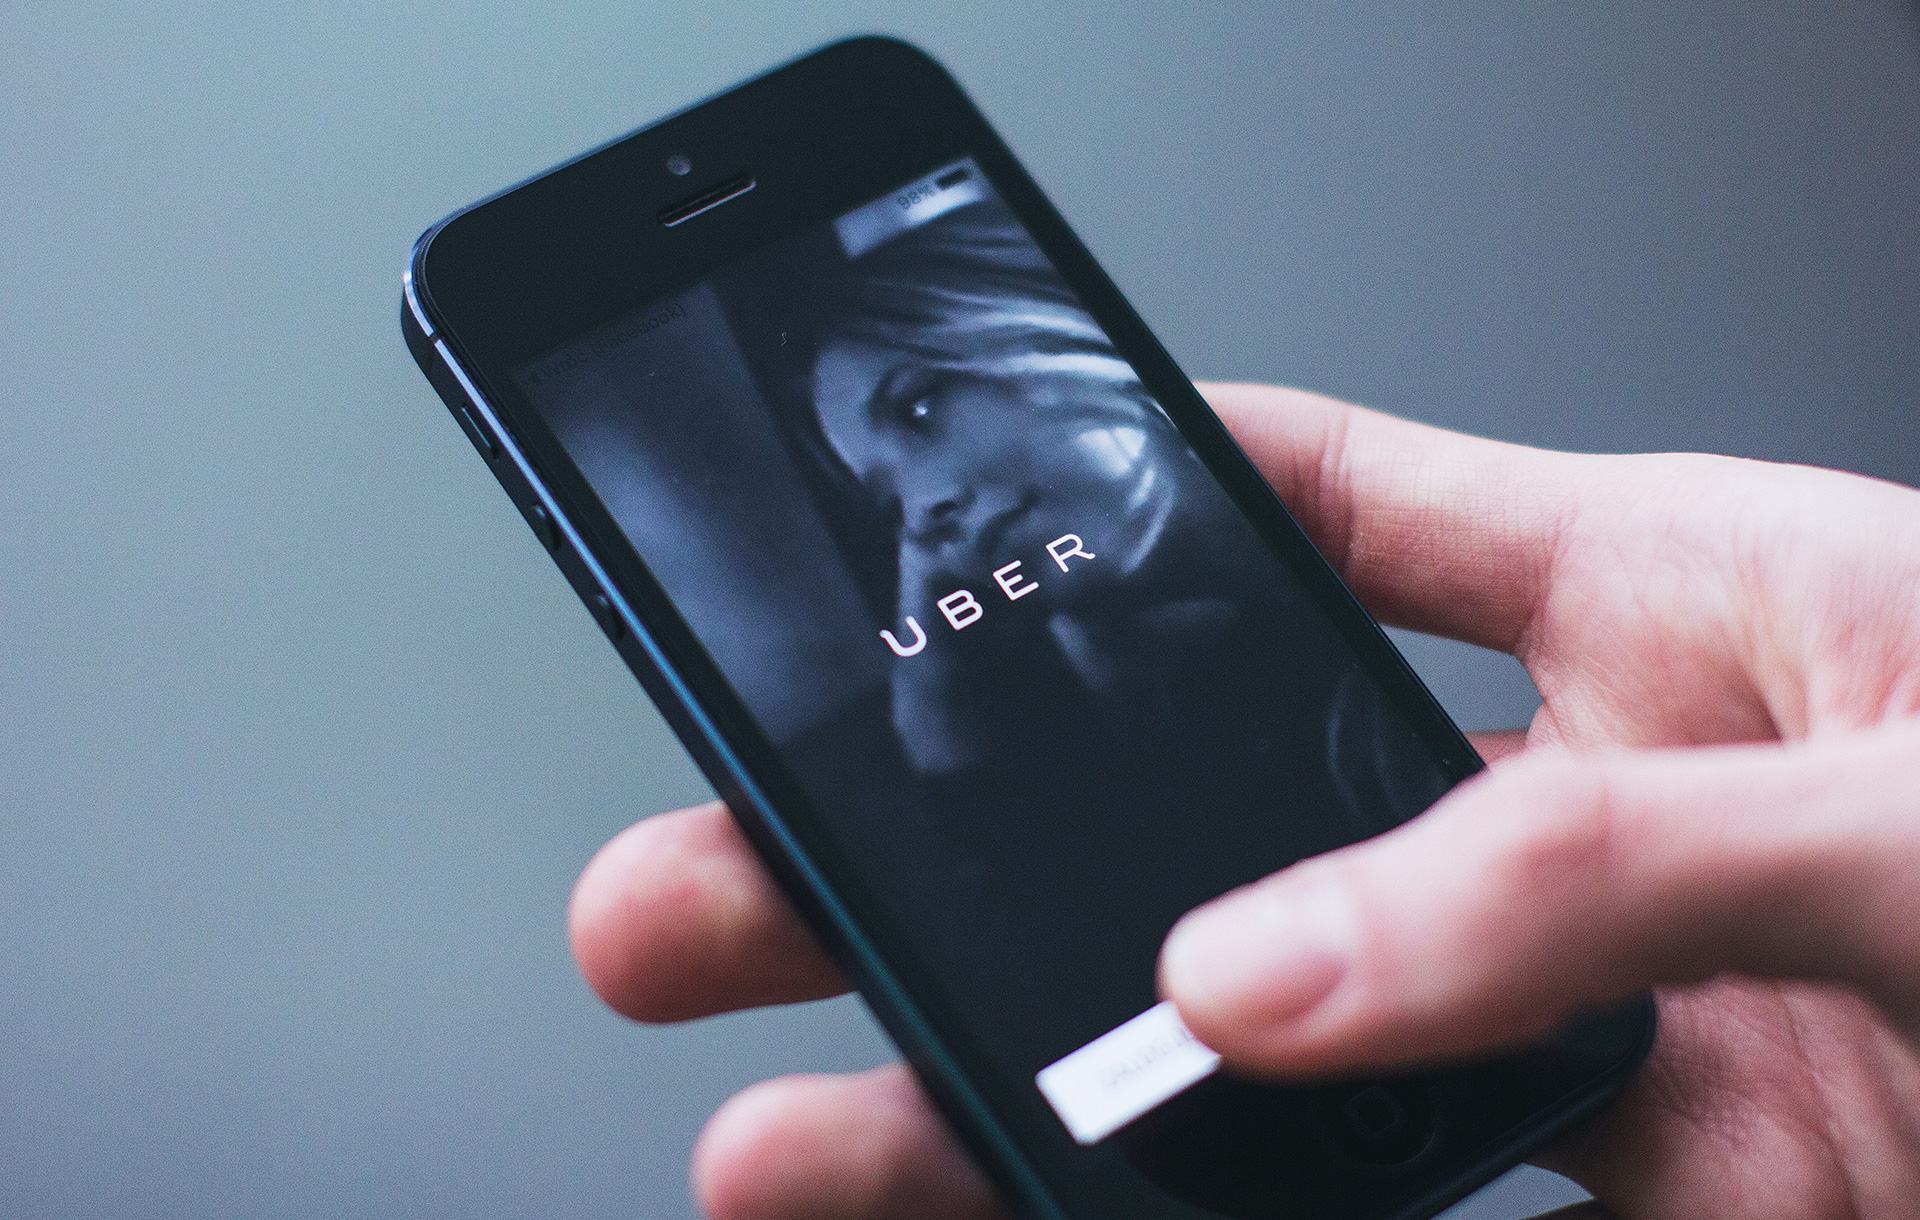 Will we see more apps like Uber? 3 trends that will define the future of sharing apps.